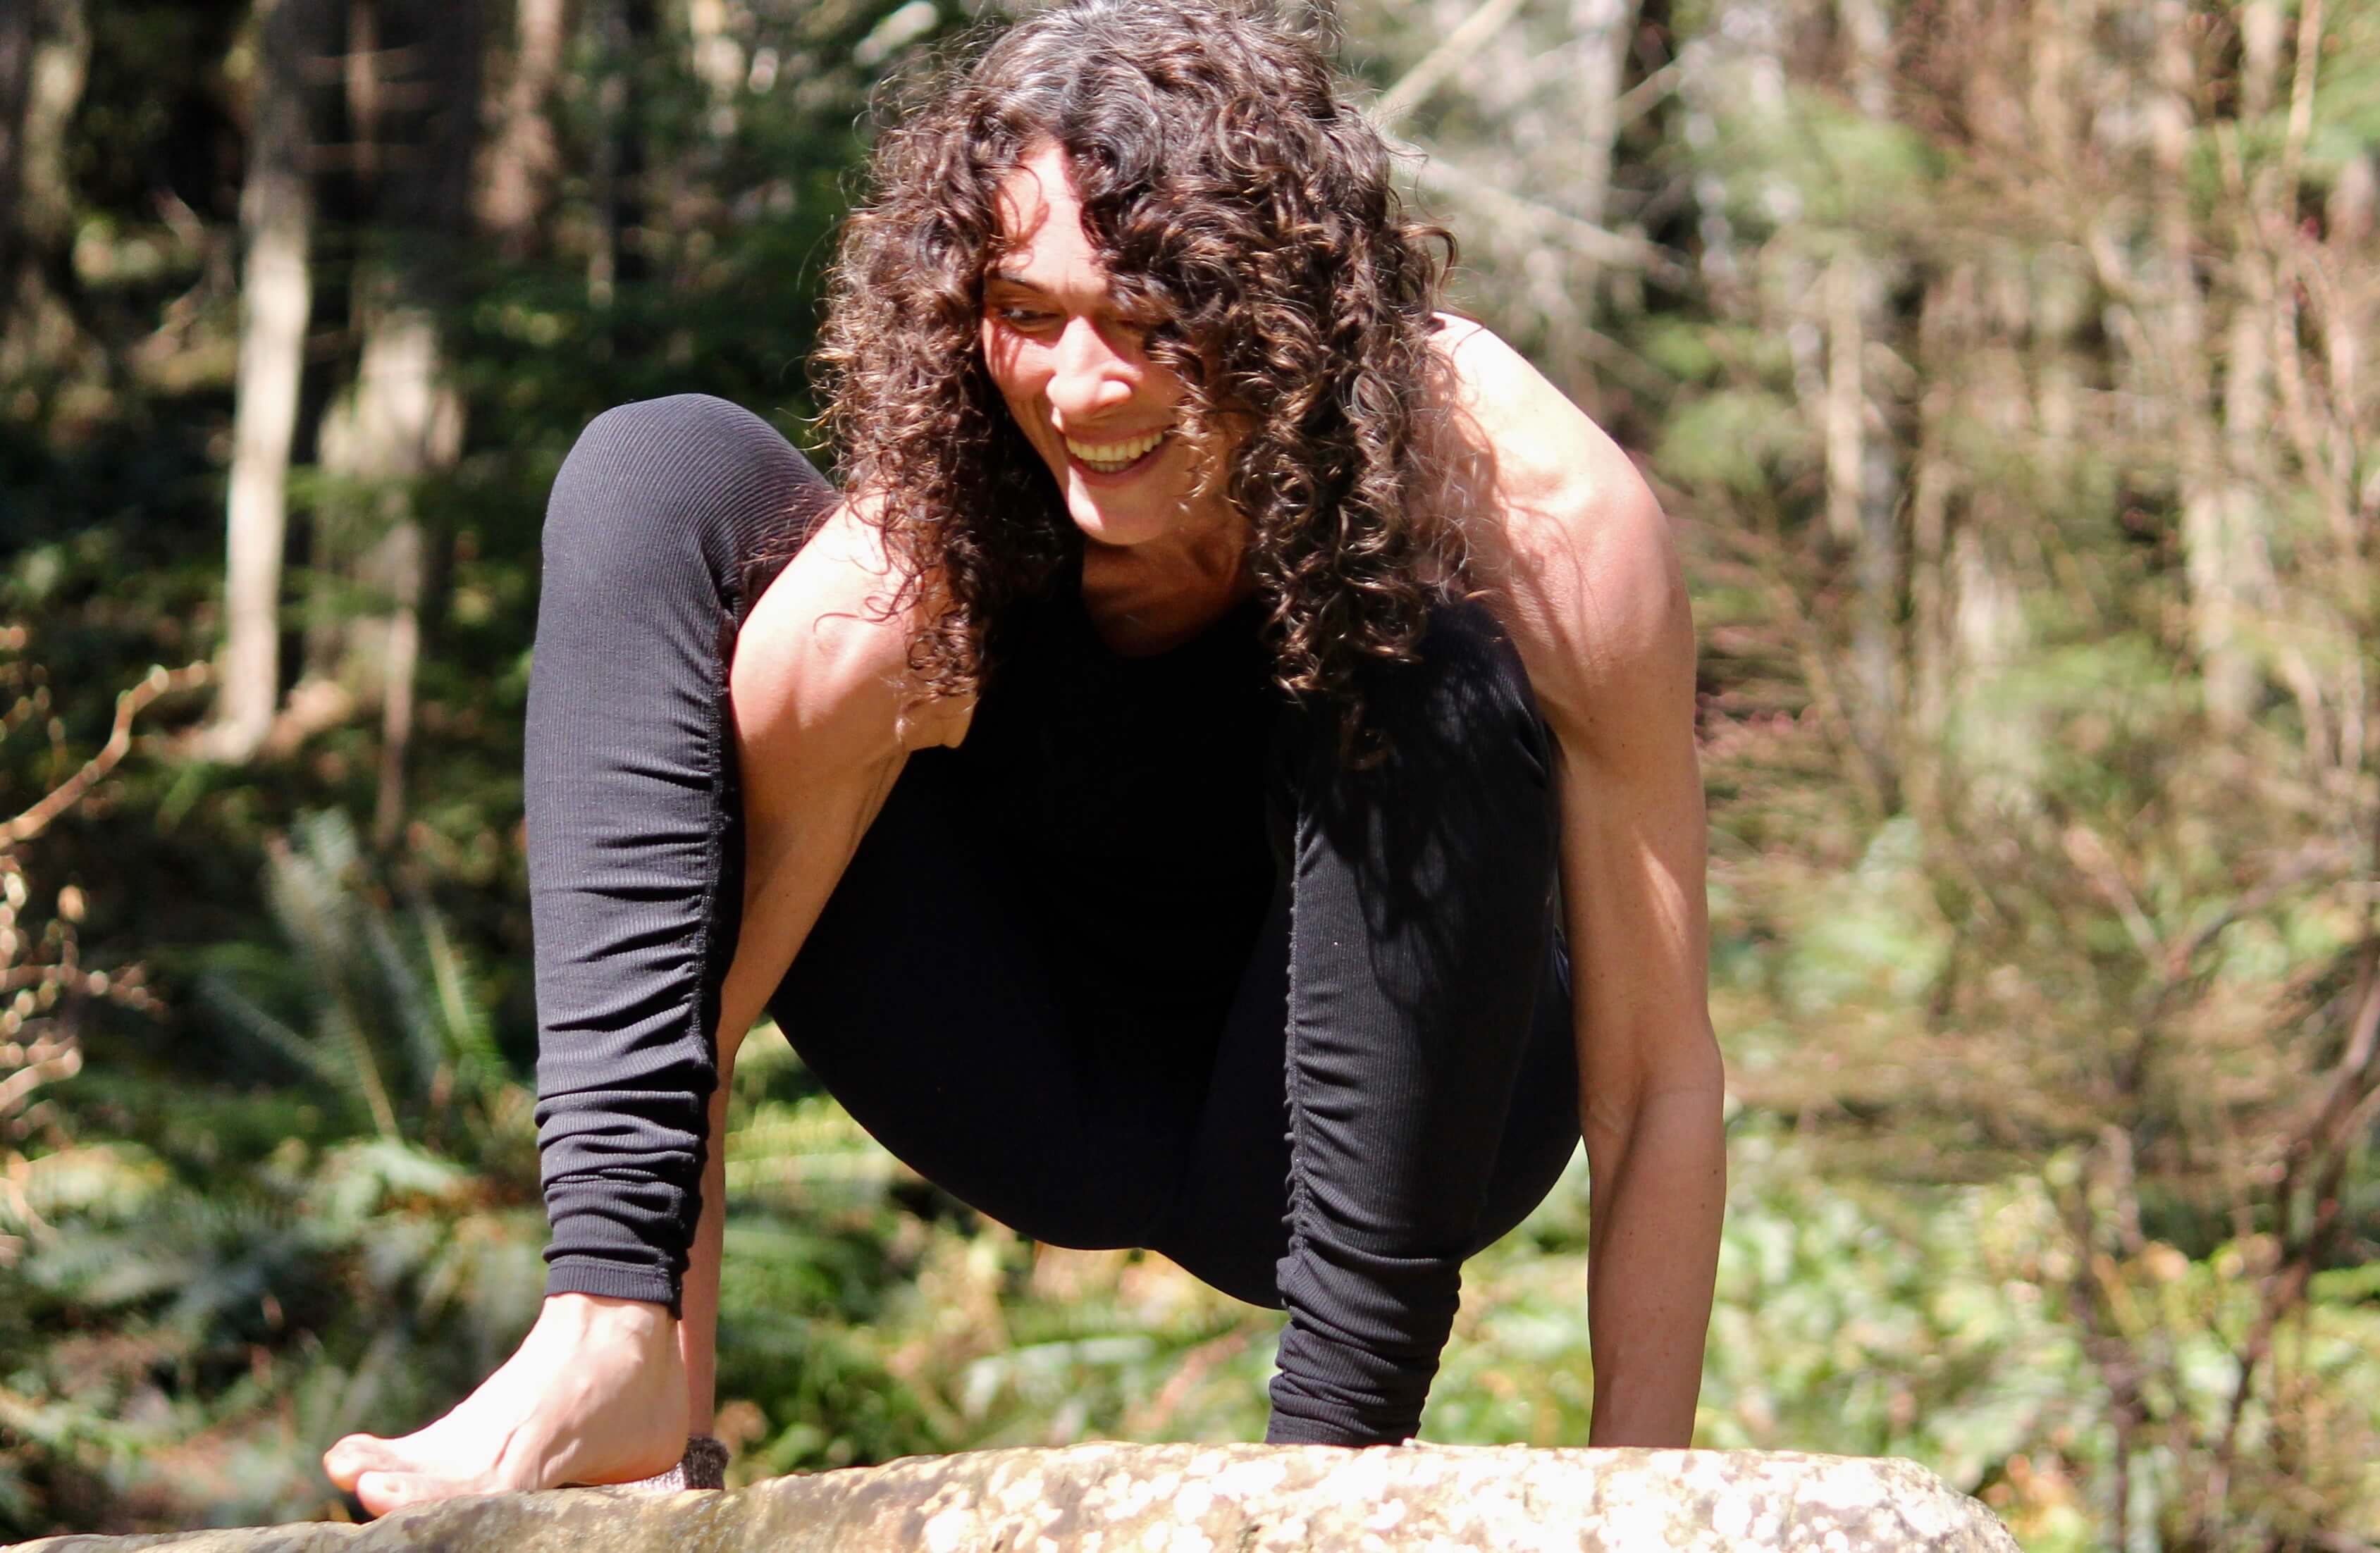 Yoga practitioner in a black outfit performing an arm-balanced pose on a rock outdoors, her laughter blending with the natural surroundings, showcasing the joy of yoga practice with Shala Yoga studio in Squamish.